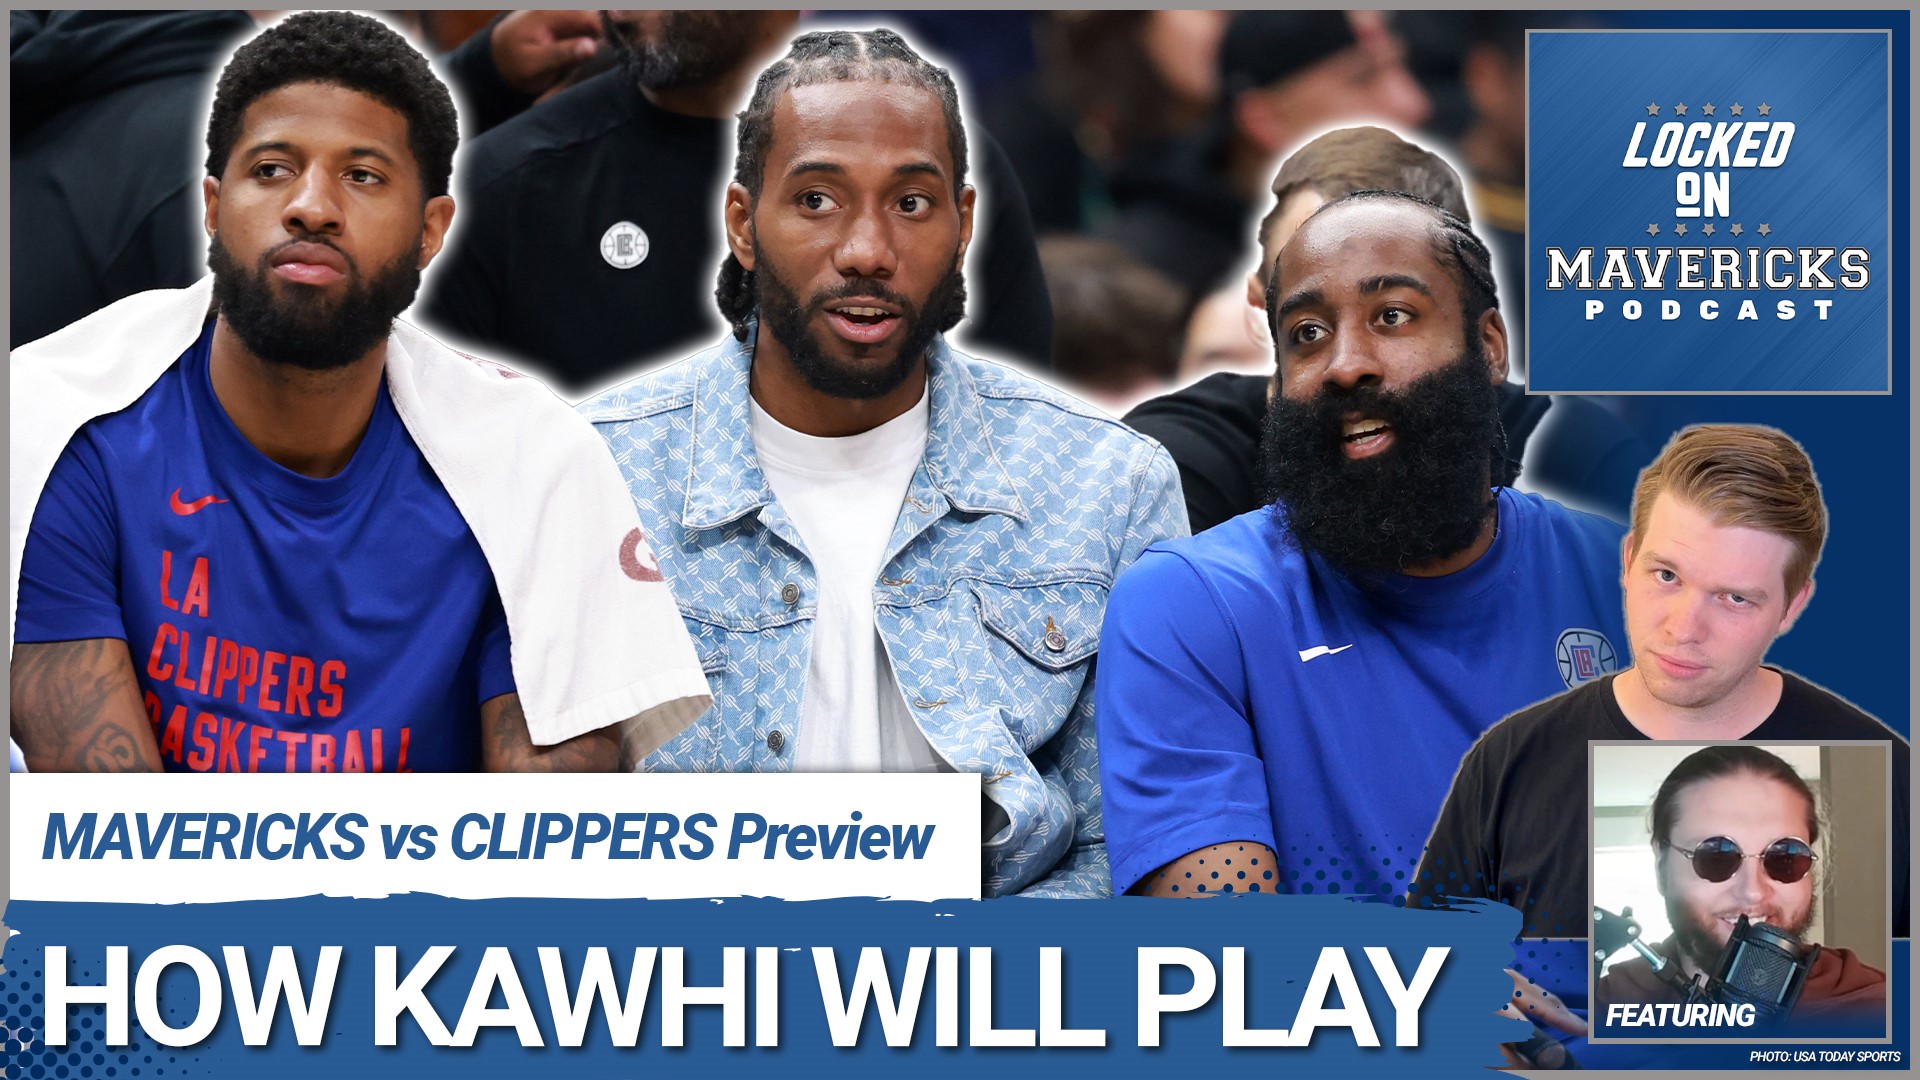 Nick Angstadt & Slightly Biased breakdown the Kawhi Leonard injury update, answer Los Angeles Clippers questions, and predict how the Dallas Mavericks could lose.